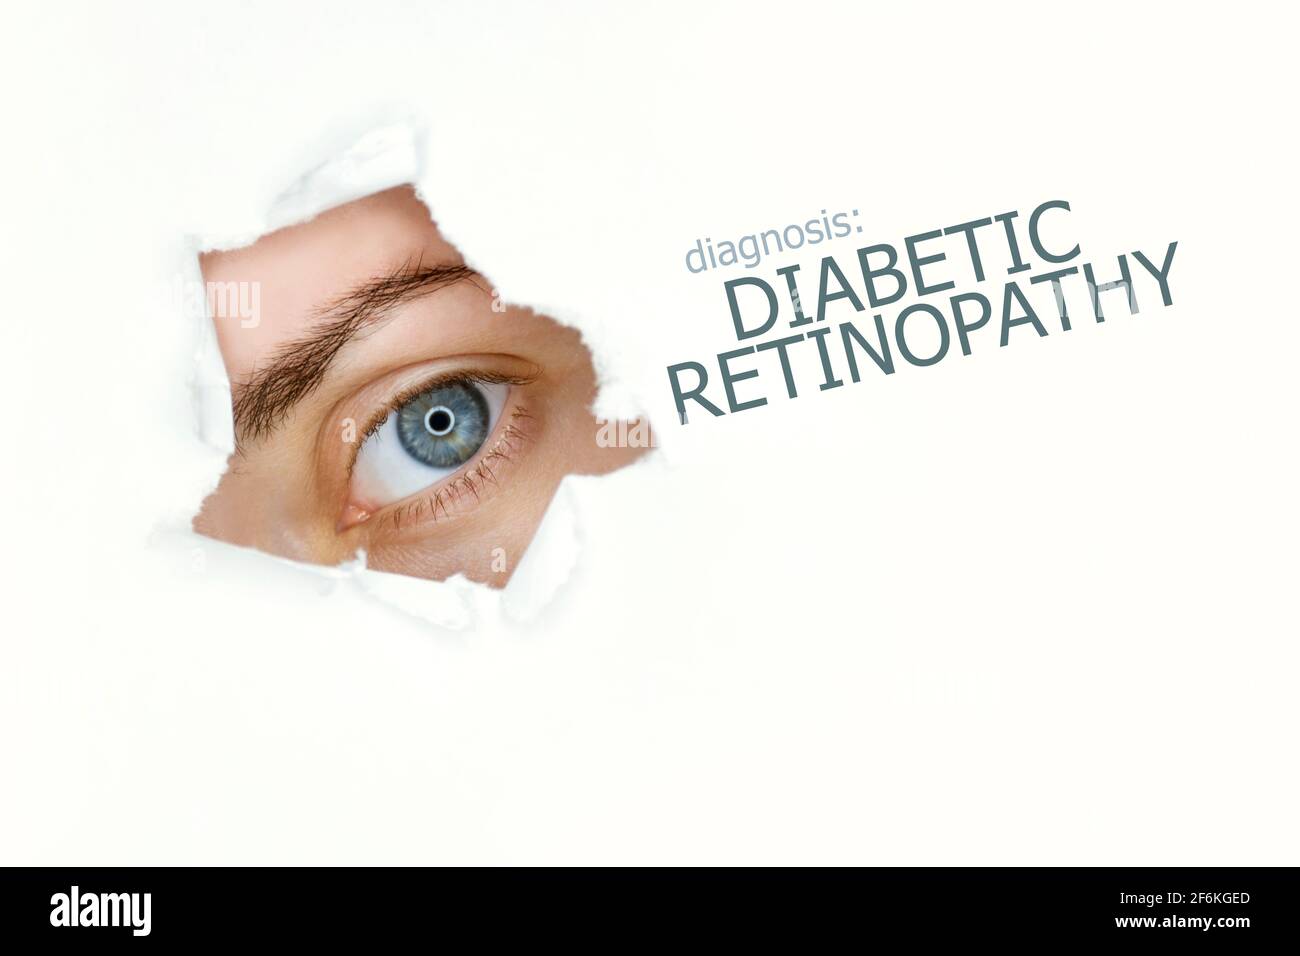 Woman`s eye looking trough teared hole in paper, words Diabetic Retinopathy on right. Eye disease concept template. White background. Stock Photo